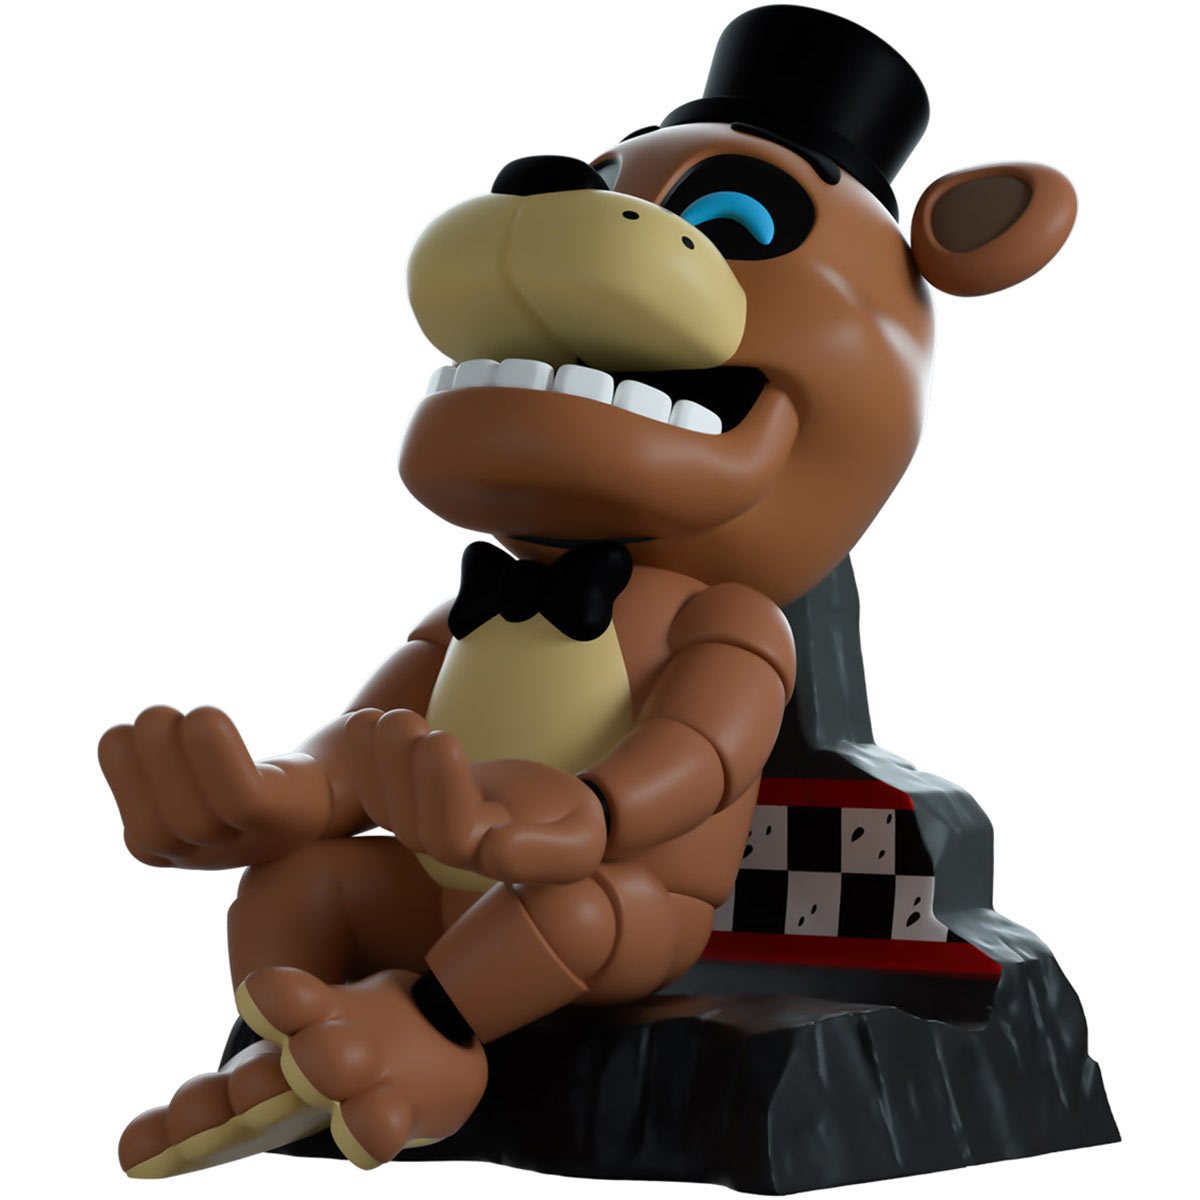 YouTooz Adds Five Nights at Freddy's to Their Product Line - aNb Media, Inc.